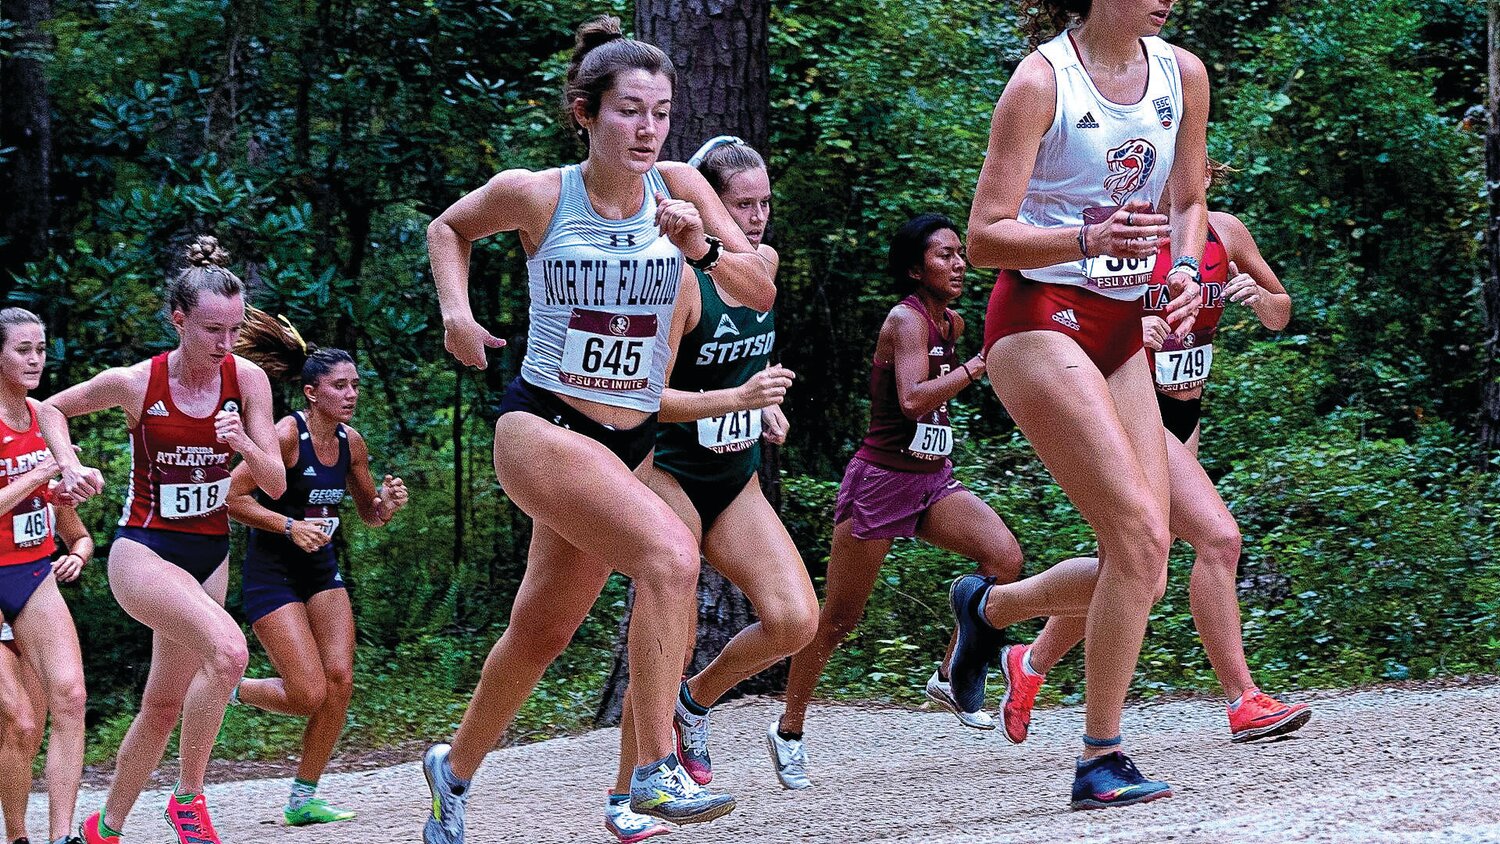 Former Fleming Island High cross country runner Emma Millson, the center ran an outstanding 18:07 split to be the top area runner at Mountain Dew Classic in Gainesville. Millson now runs for the University of North Florida.